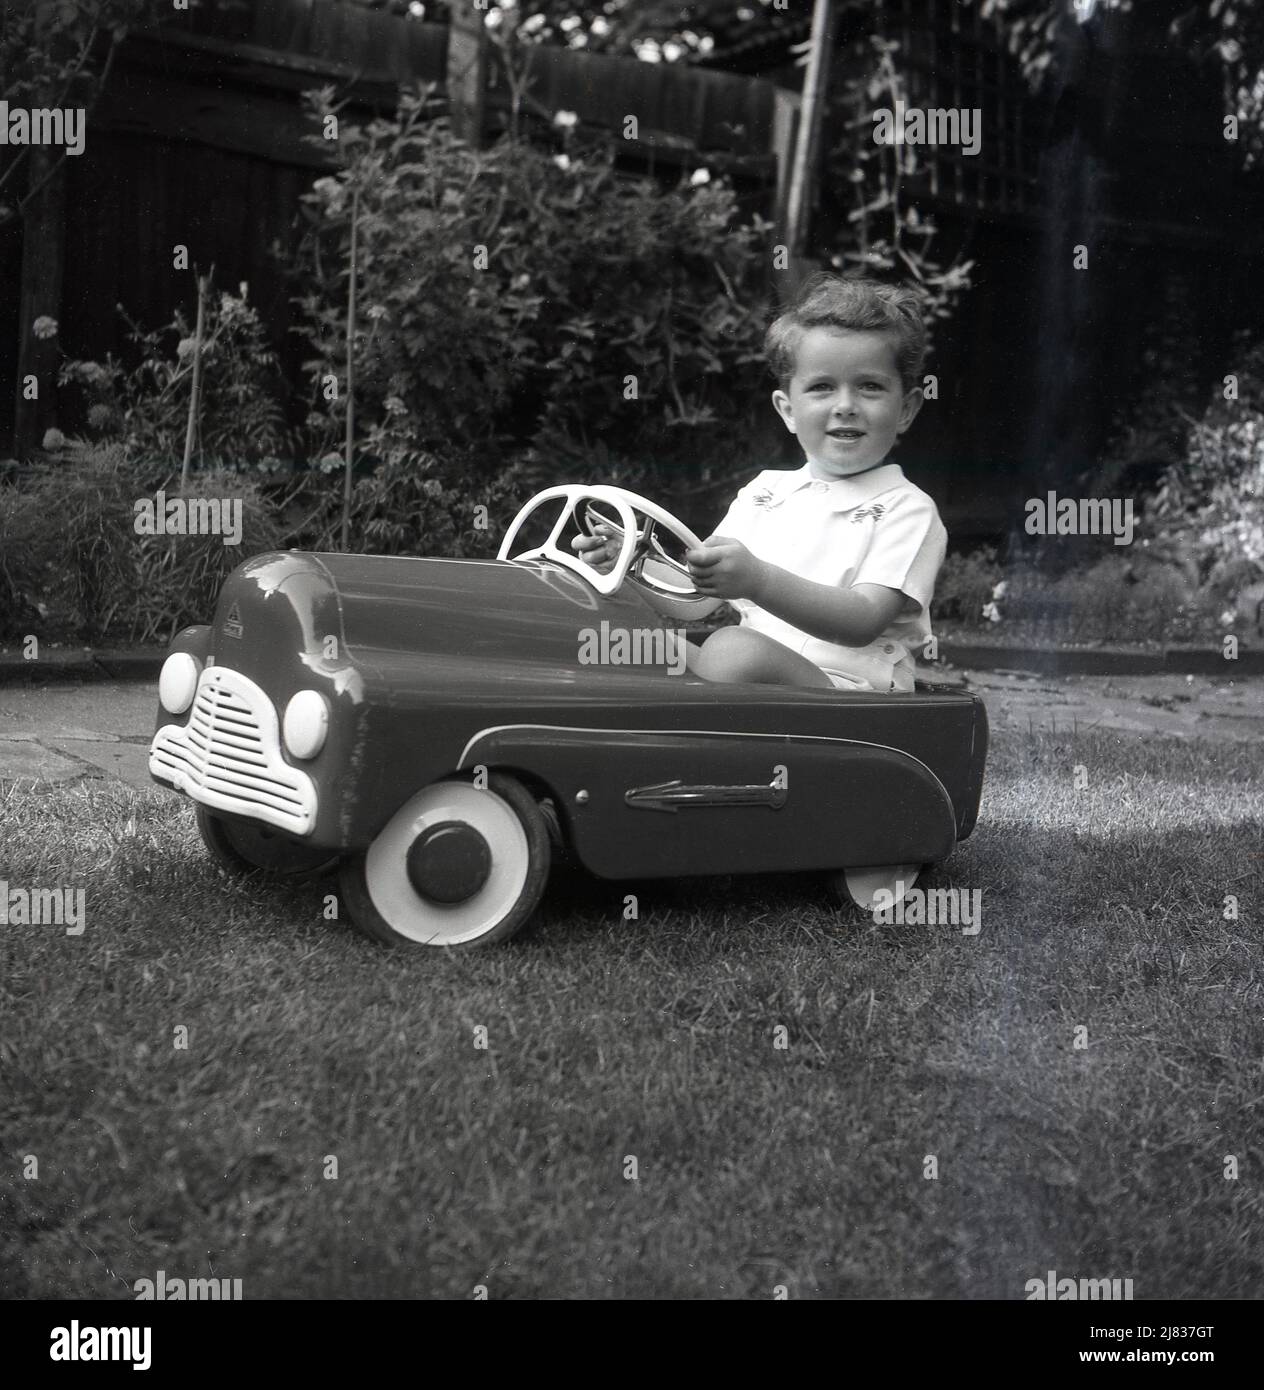 1953, historical, outside in a garden, a young boy sitting in his ride-on toy pedal car of the era, a British made Tri-Ang 'Thirty B'.  Made out of pressed steel, the toy car had a high gloss enamel finish, with Chrome arrows on the side. Tri-Ang was the brand name of Line Bros. Ltd, a British business, who in this era was the largest toy and baby carriage manufacturing company in the world. Stock Photo